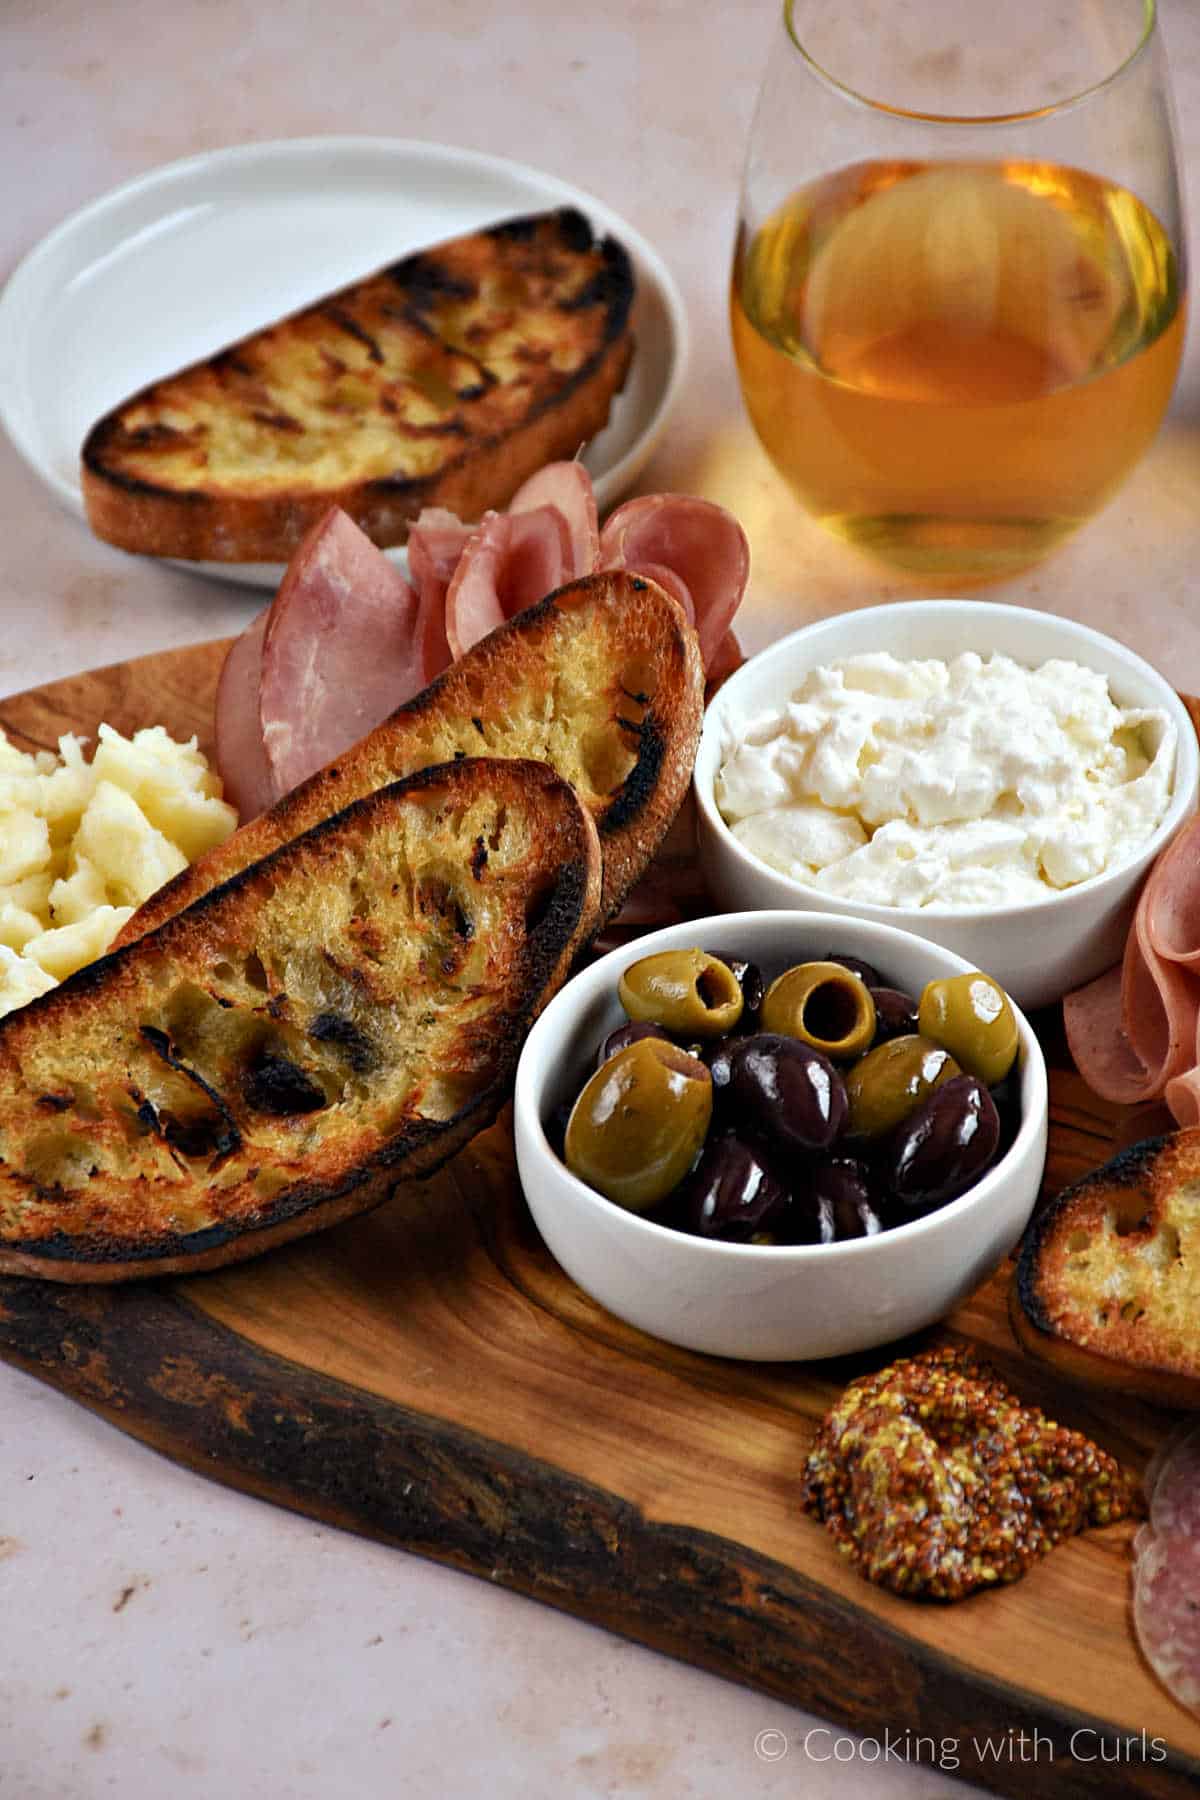 Mozzarella cheese, ham, olives, mustard, and bowl of burrata cheese on a wood board.